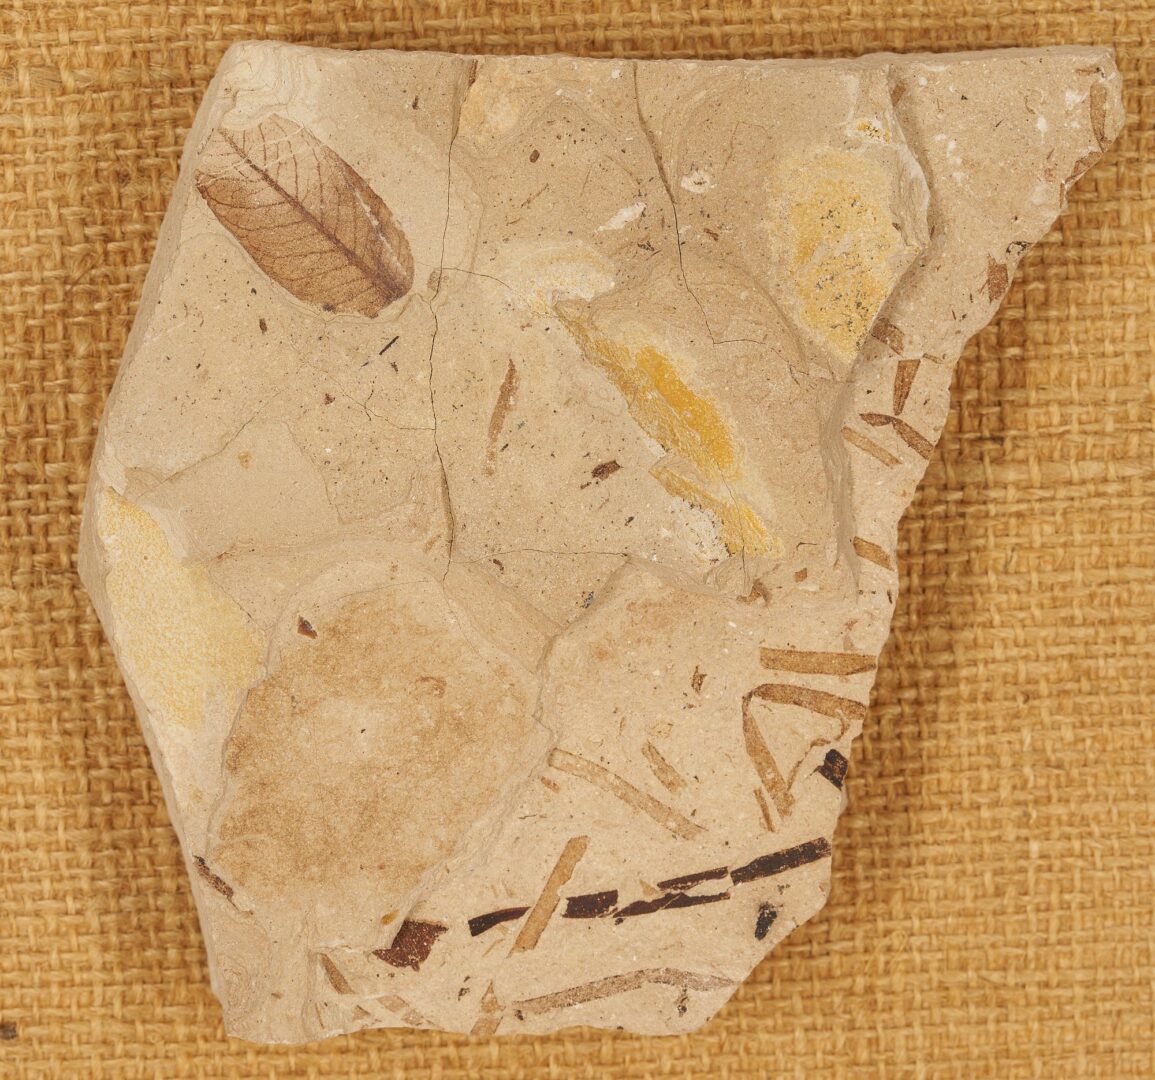 Lot 977: Fossil Collection incl. Ammonoid & Framed Display